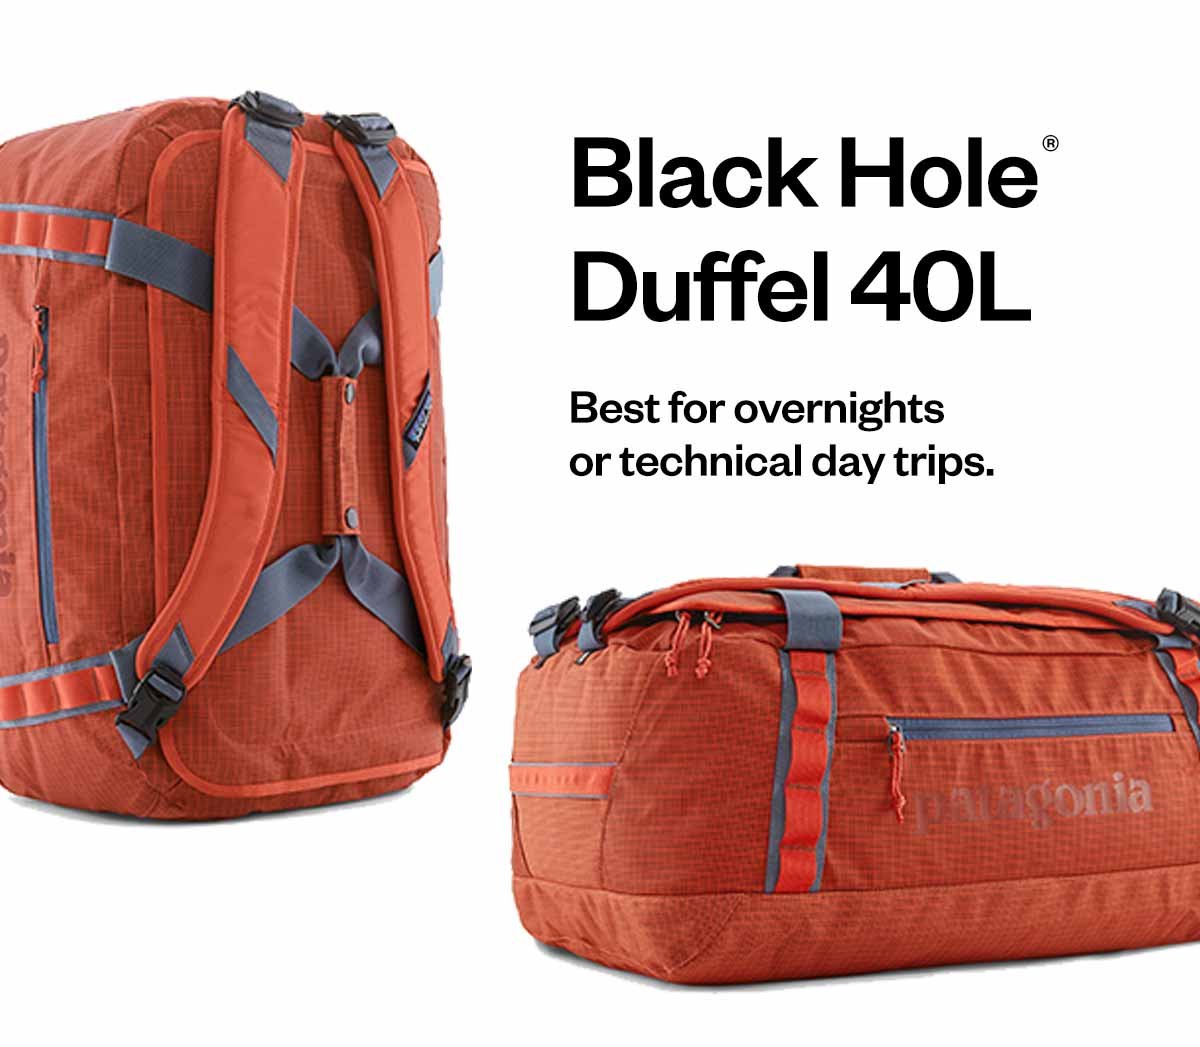 Black Hole® Duffel 40 liter. Best for overnights or technical day trips.